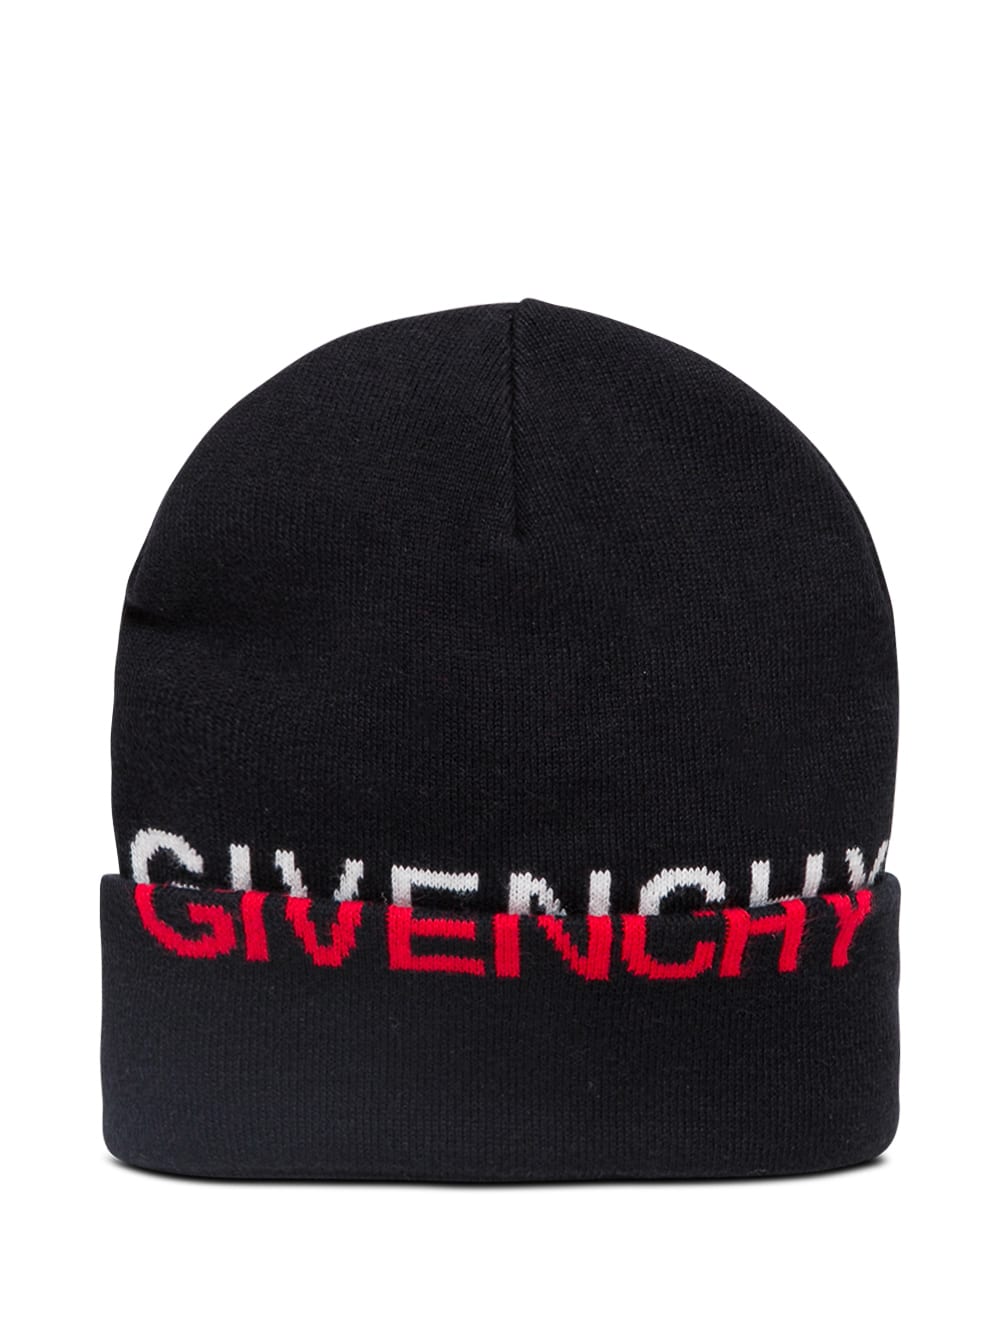 Givenchy Black Cotton And Cashmere Hat With Logo